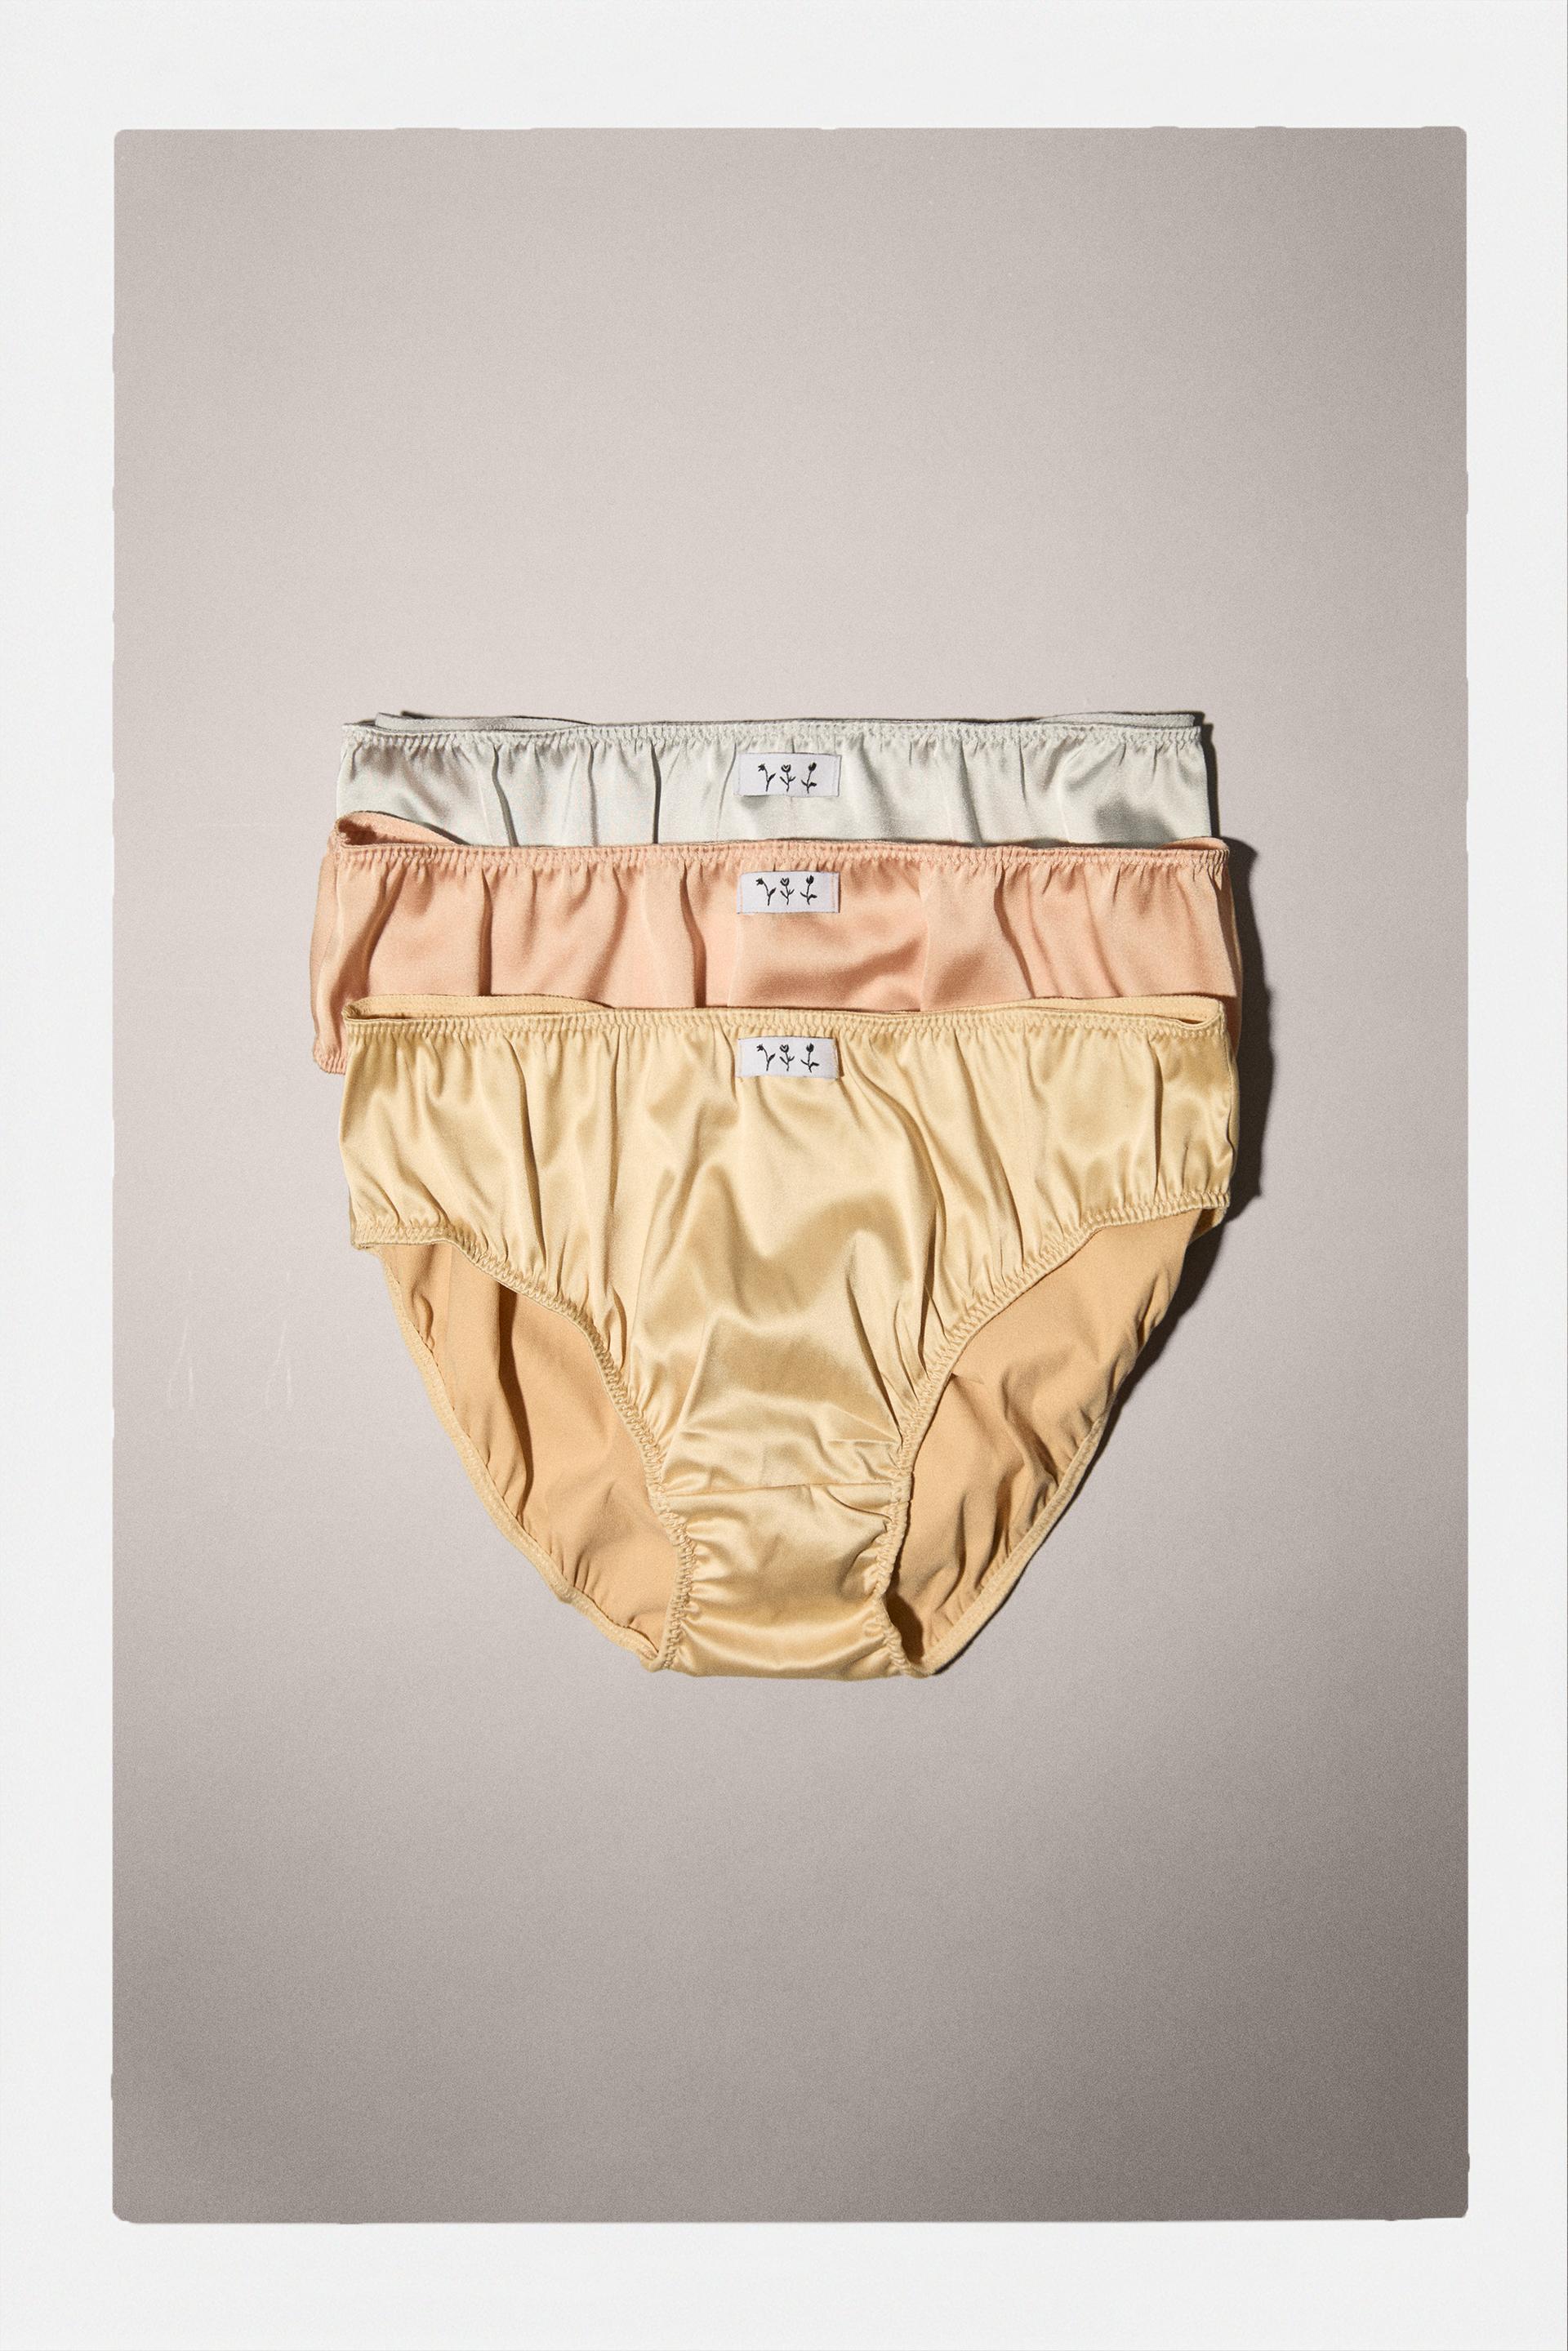 Zara Panties in Central Region for sale ▷ Prices on